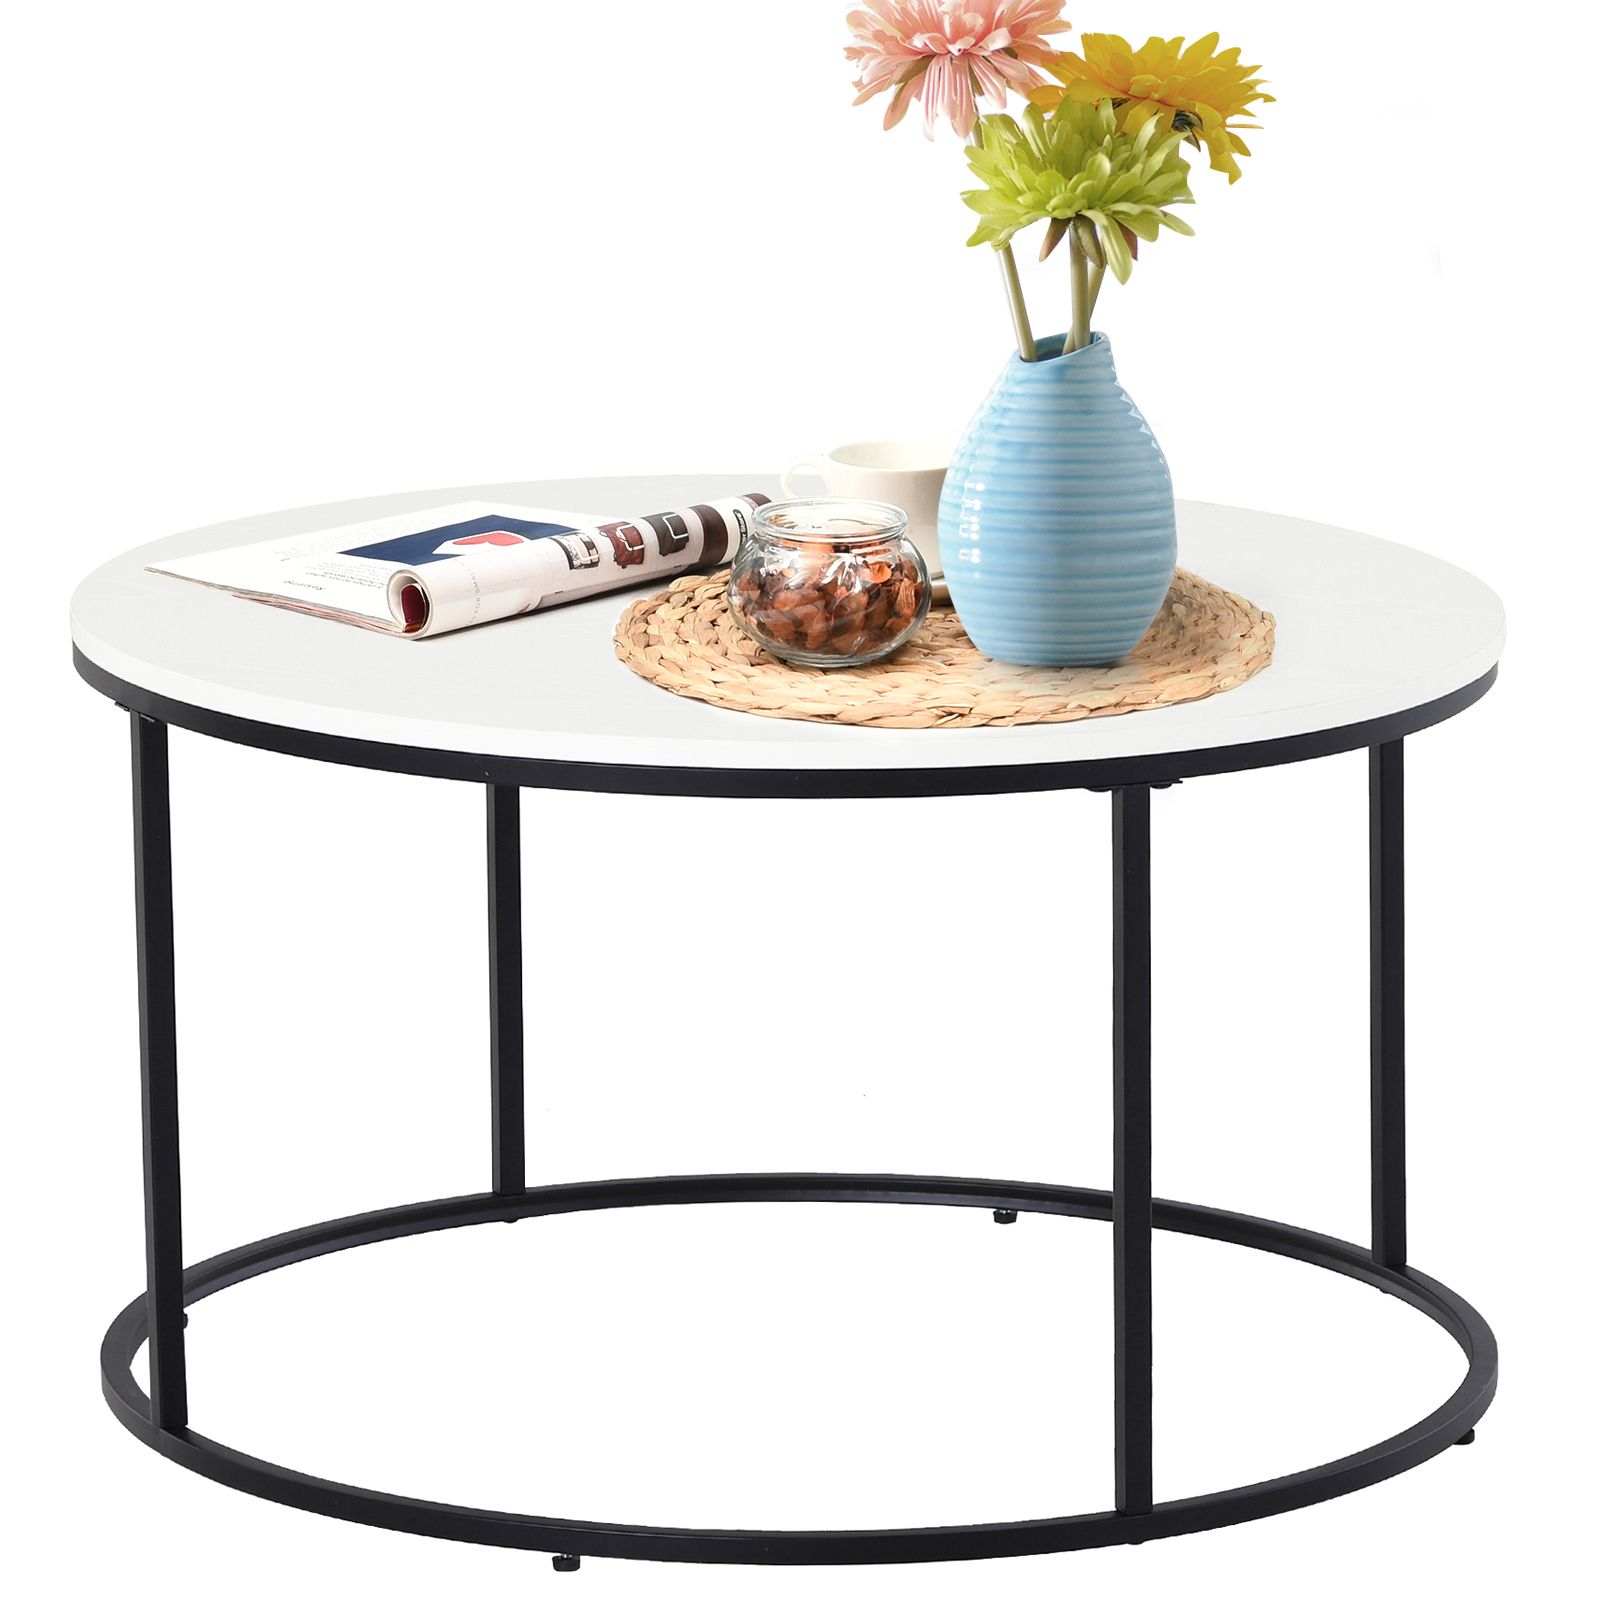 Homcom Metal Round Coffee Sofa Table Side With A Simply Chic Modern Intended For Round Console Tables (View 6 of 20)